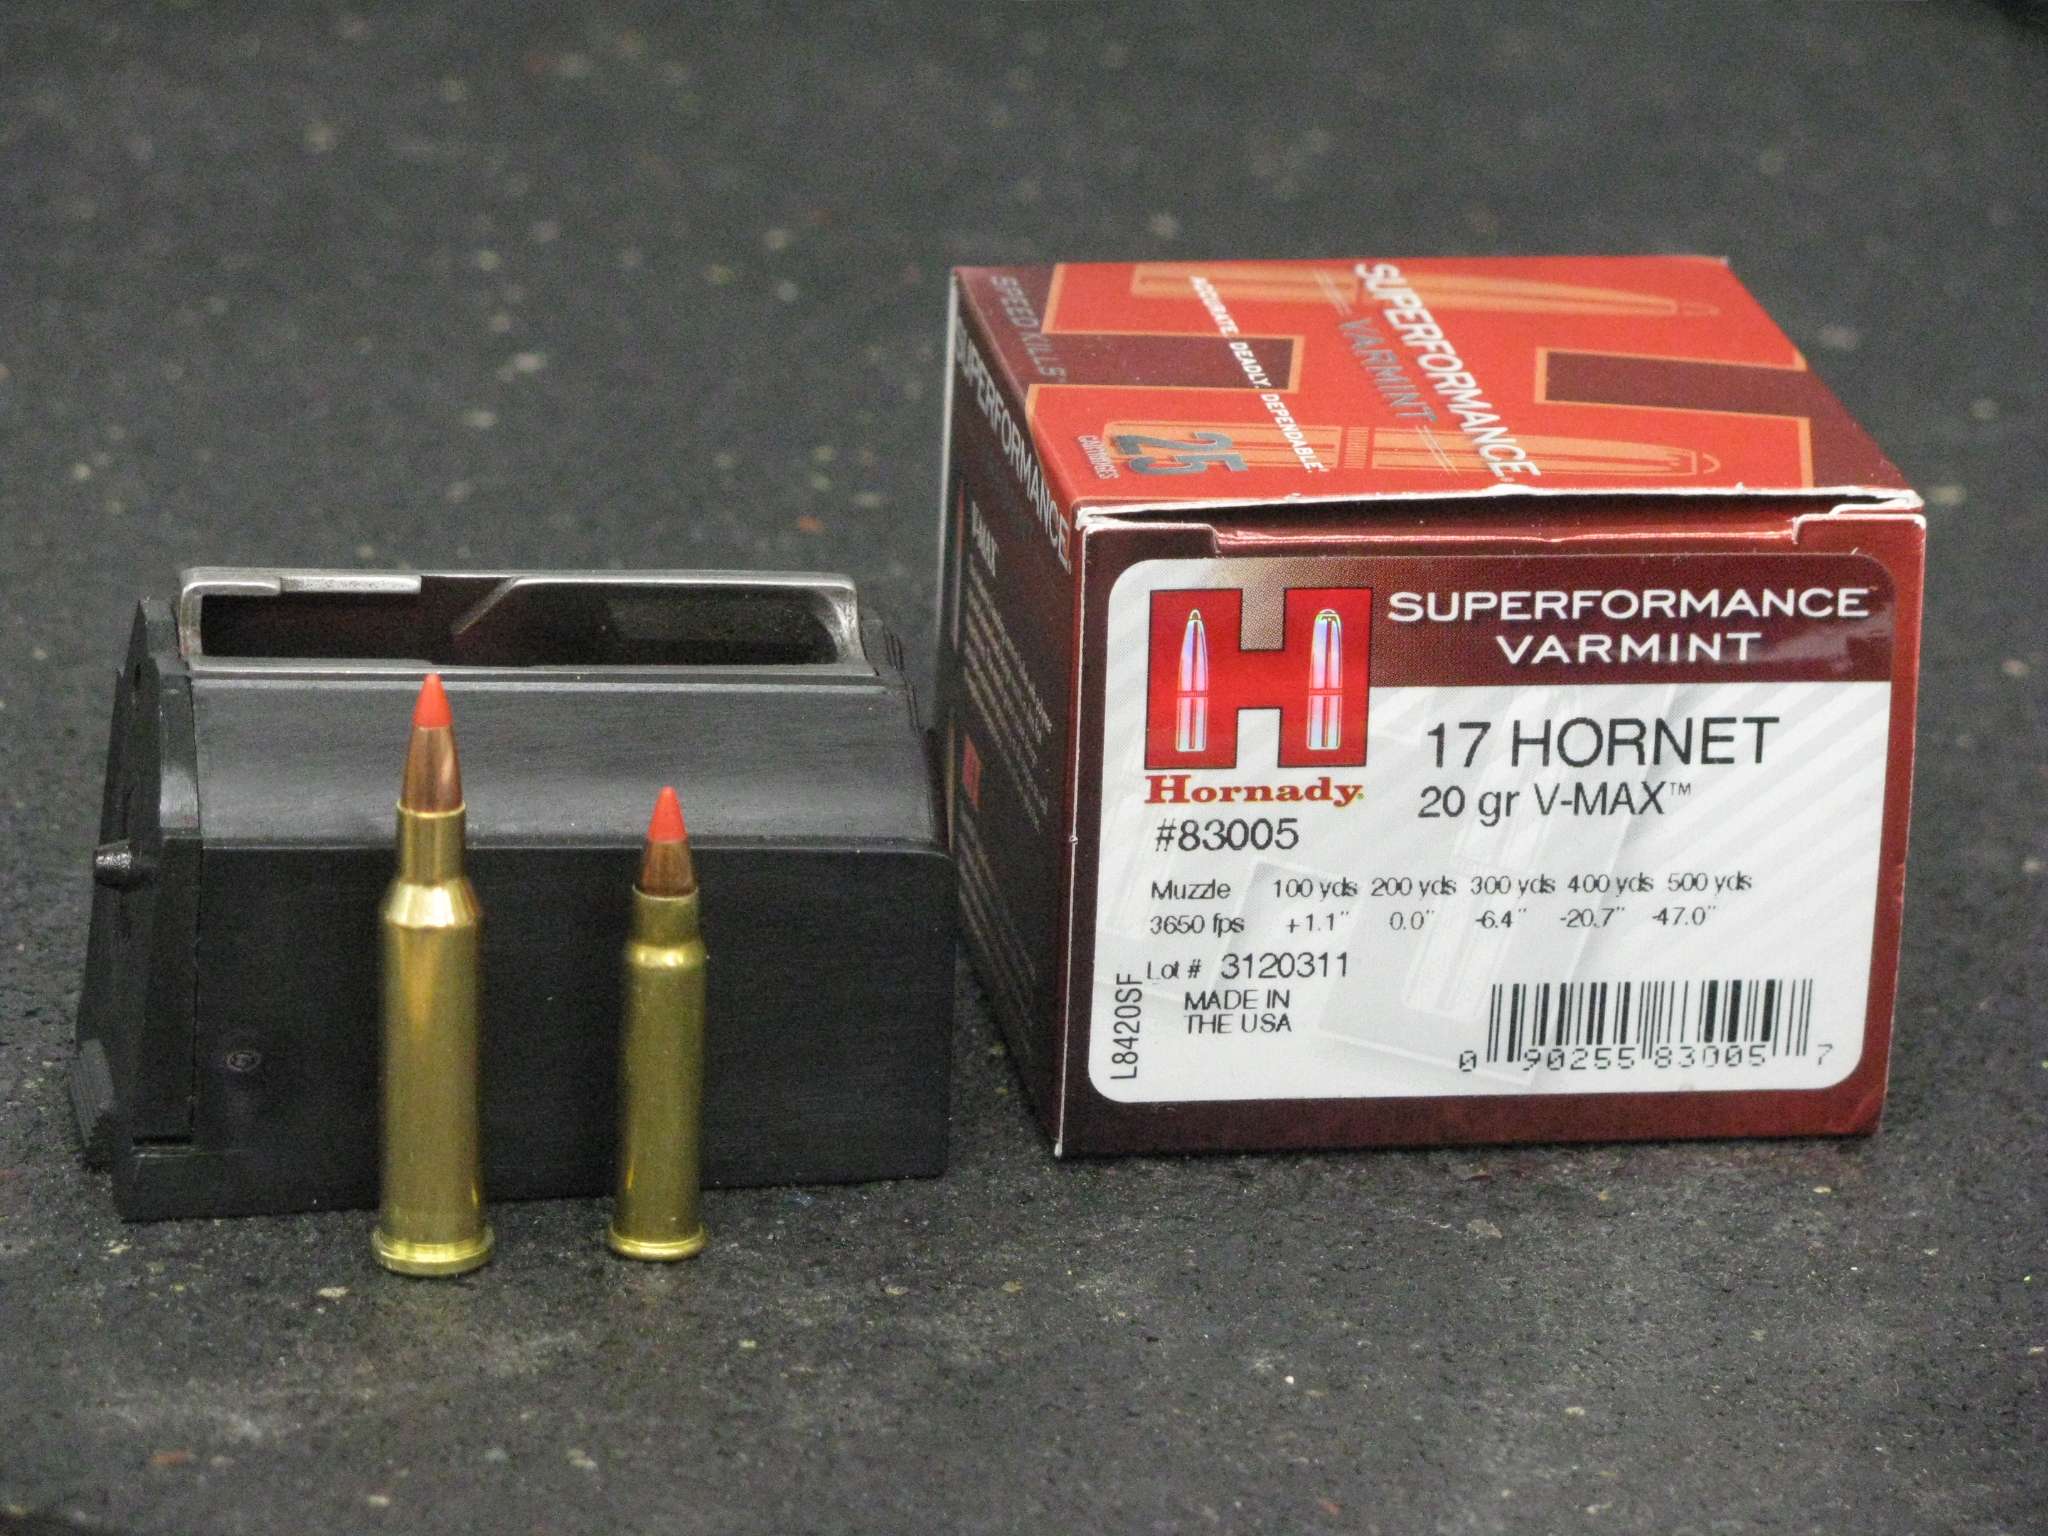 Here it is next to the 17HMR. 